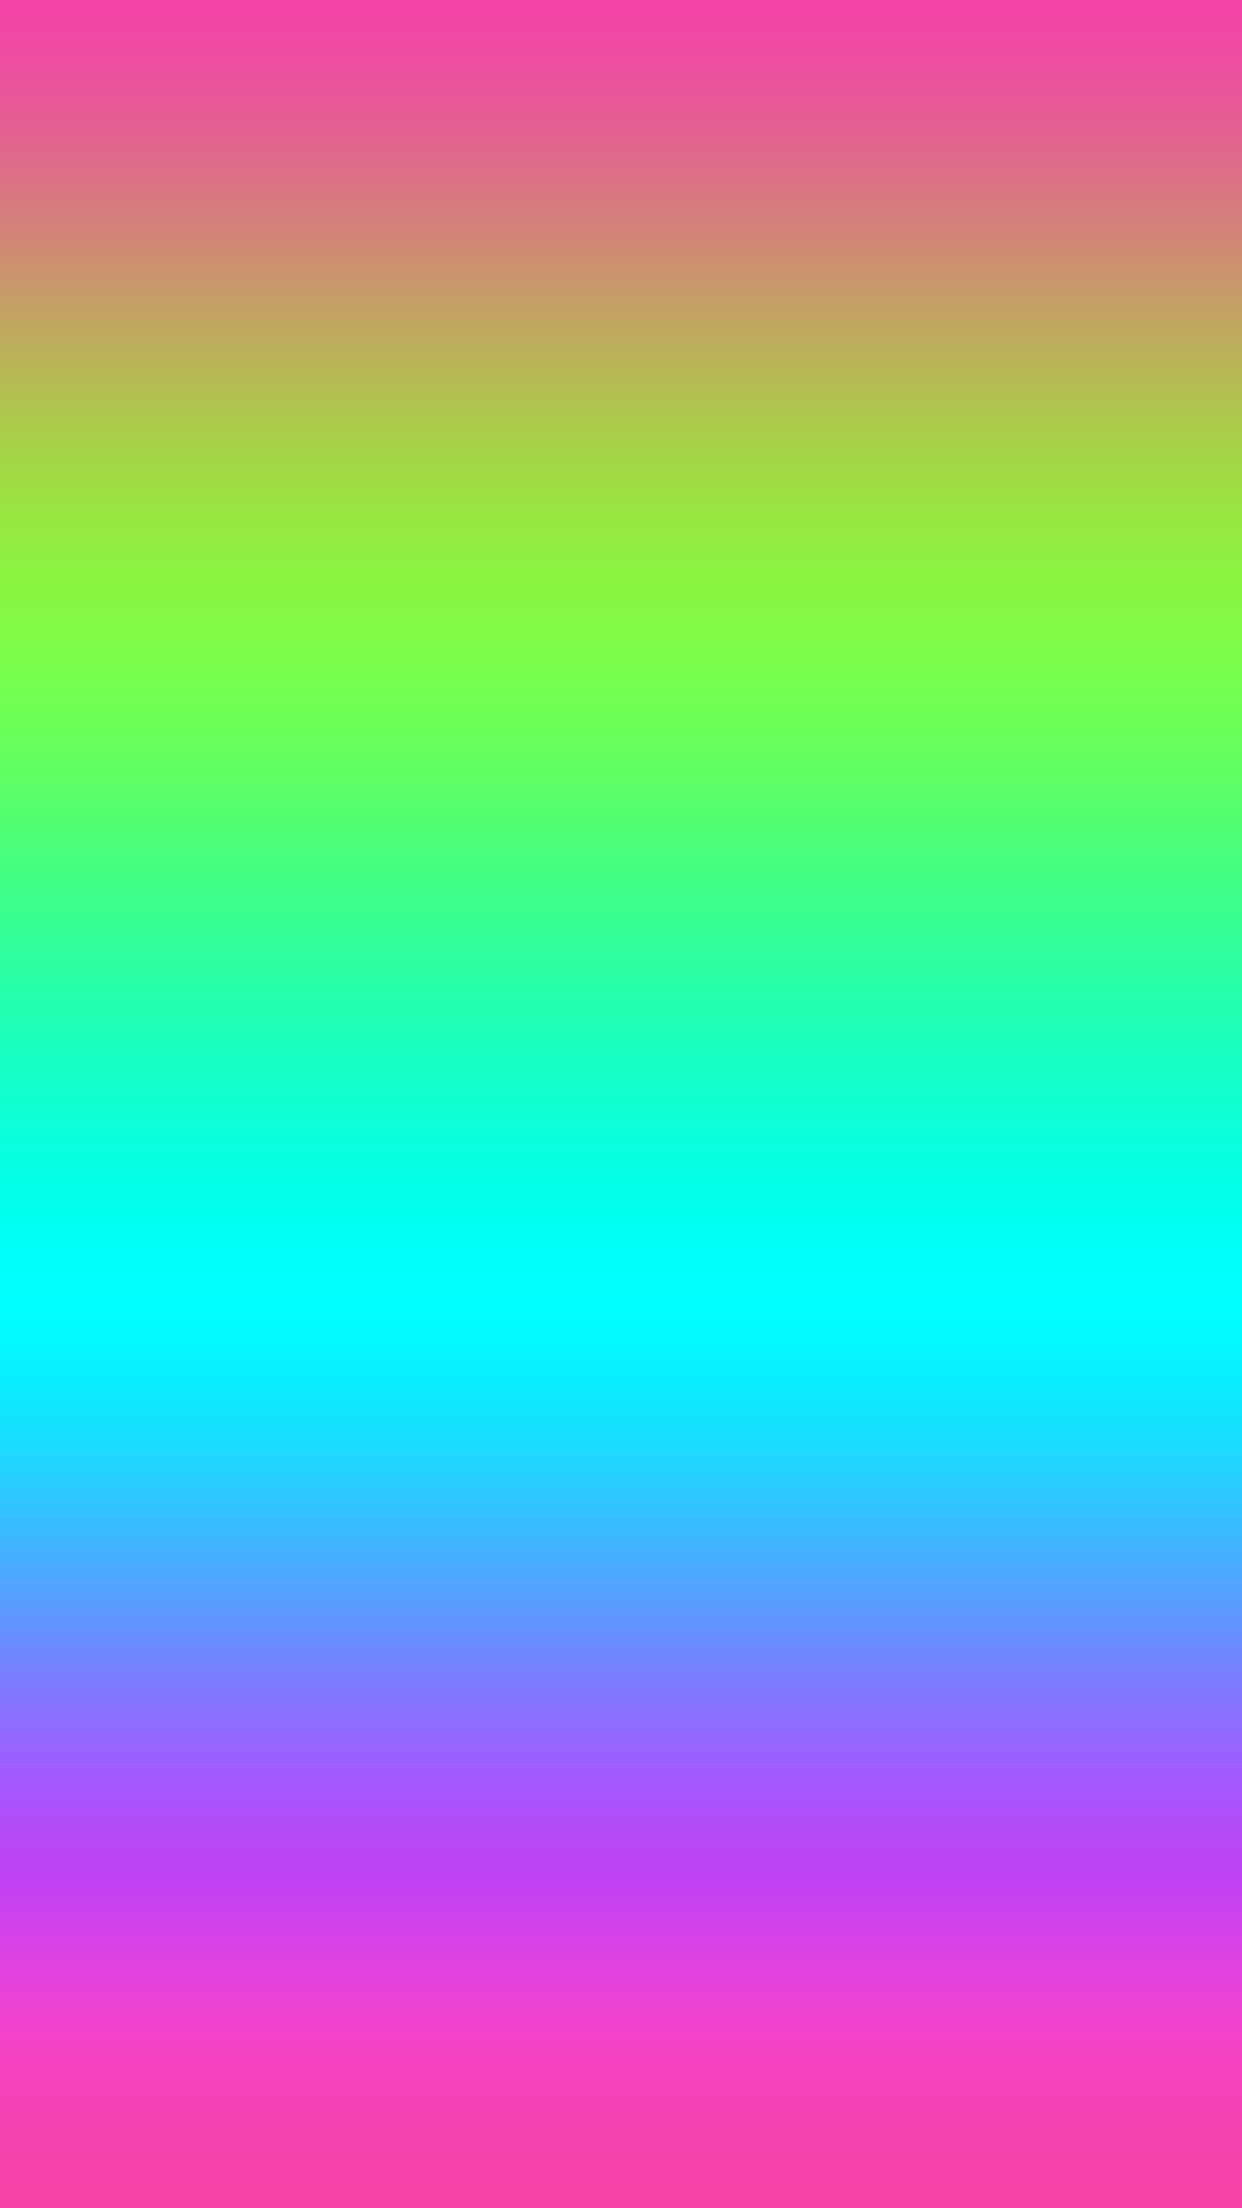 1242x2208 Gradient, ombre, pink, blue, purple, green, wallpaper, hd, iPhone, iPad,  android, Samsung